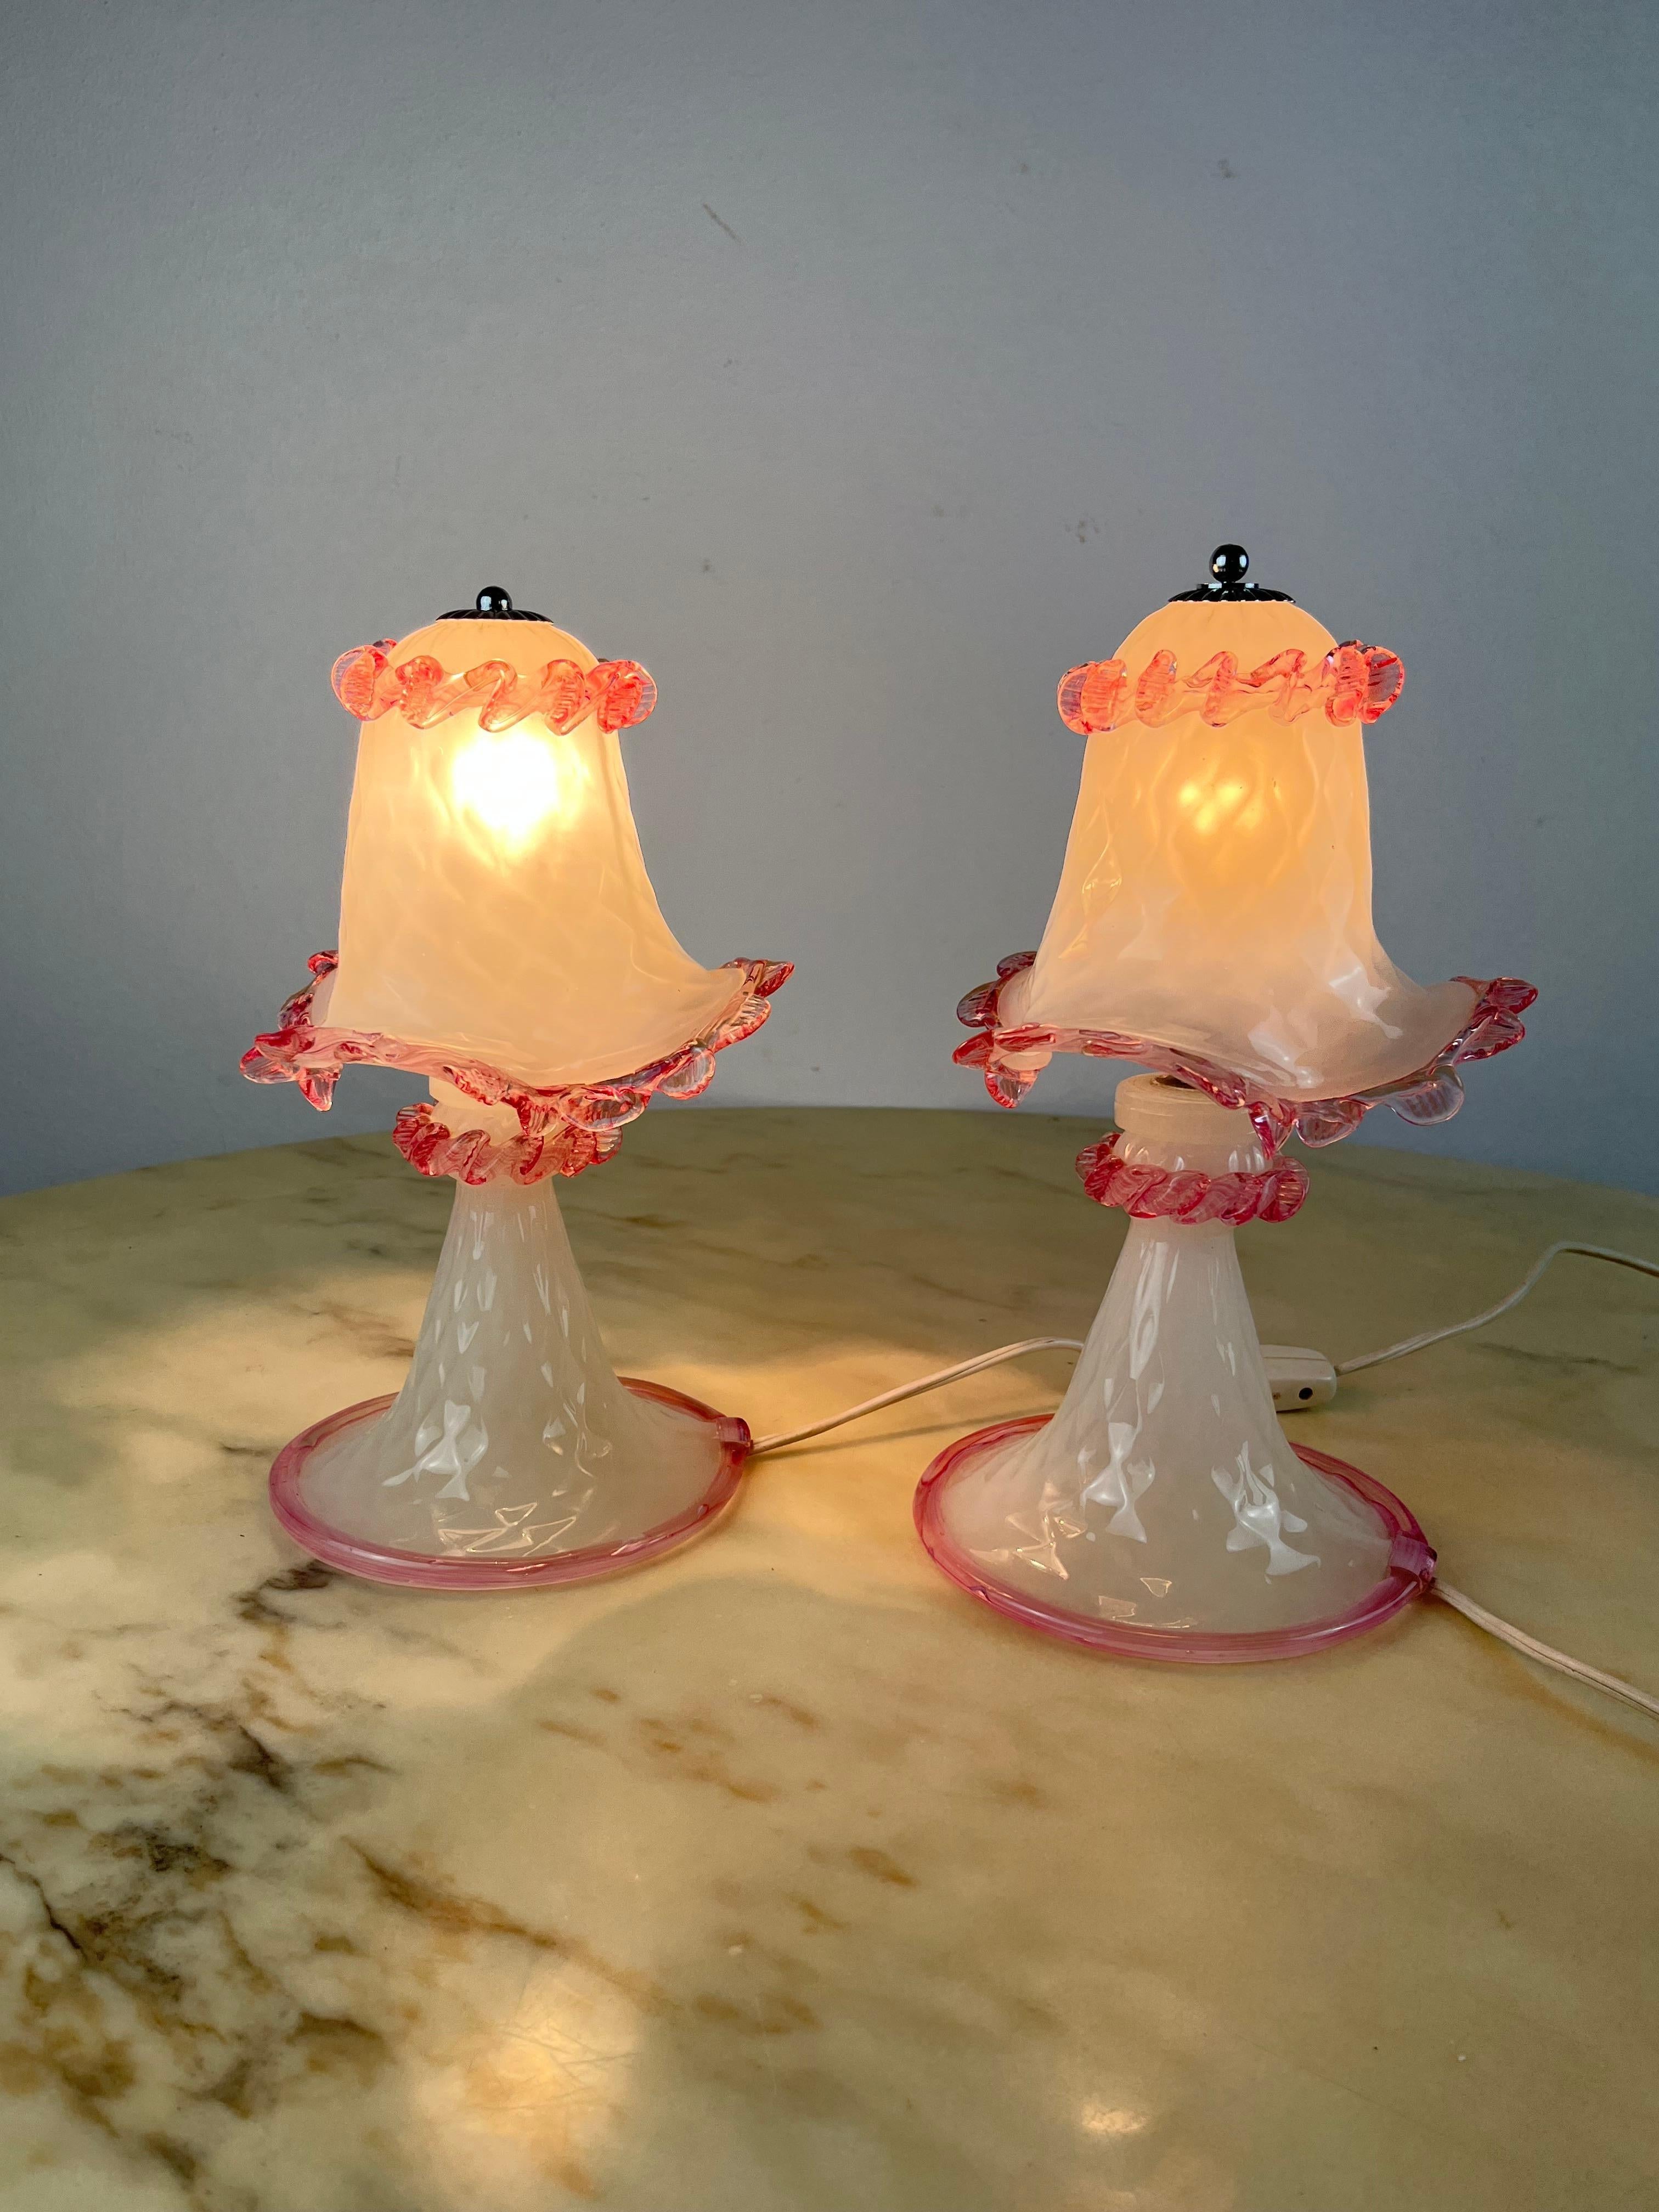 Pair of Murano glass bedside lamps, Italy, 1980s
Intact and functional, they are in excellent condition. Connection for e14 lamps.